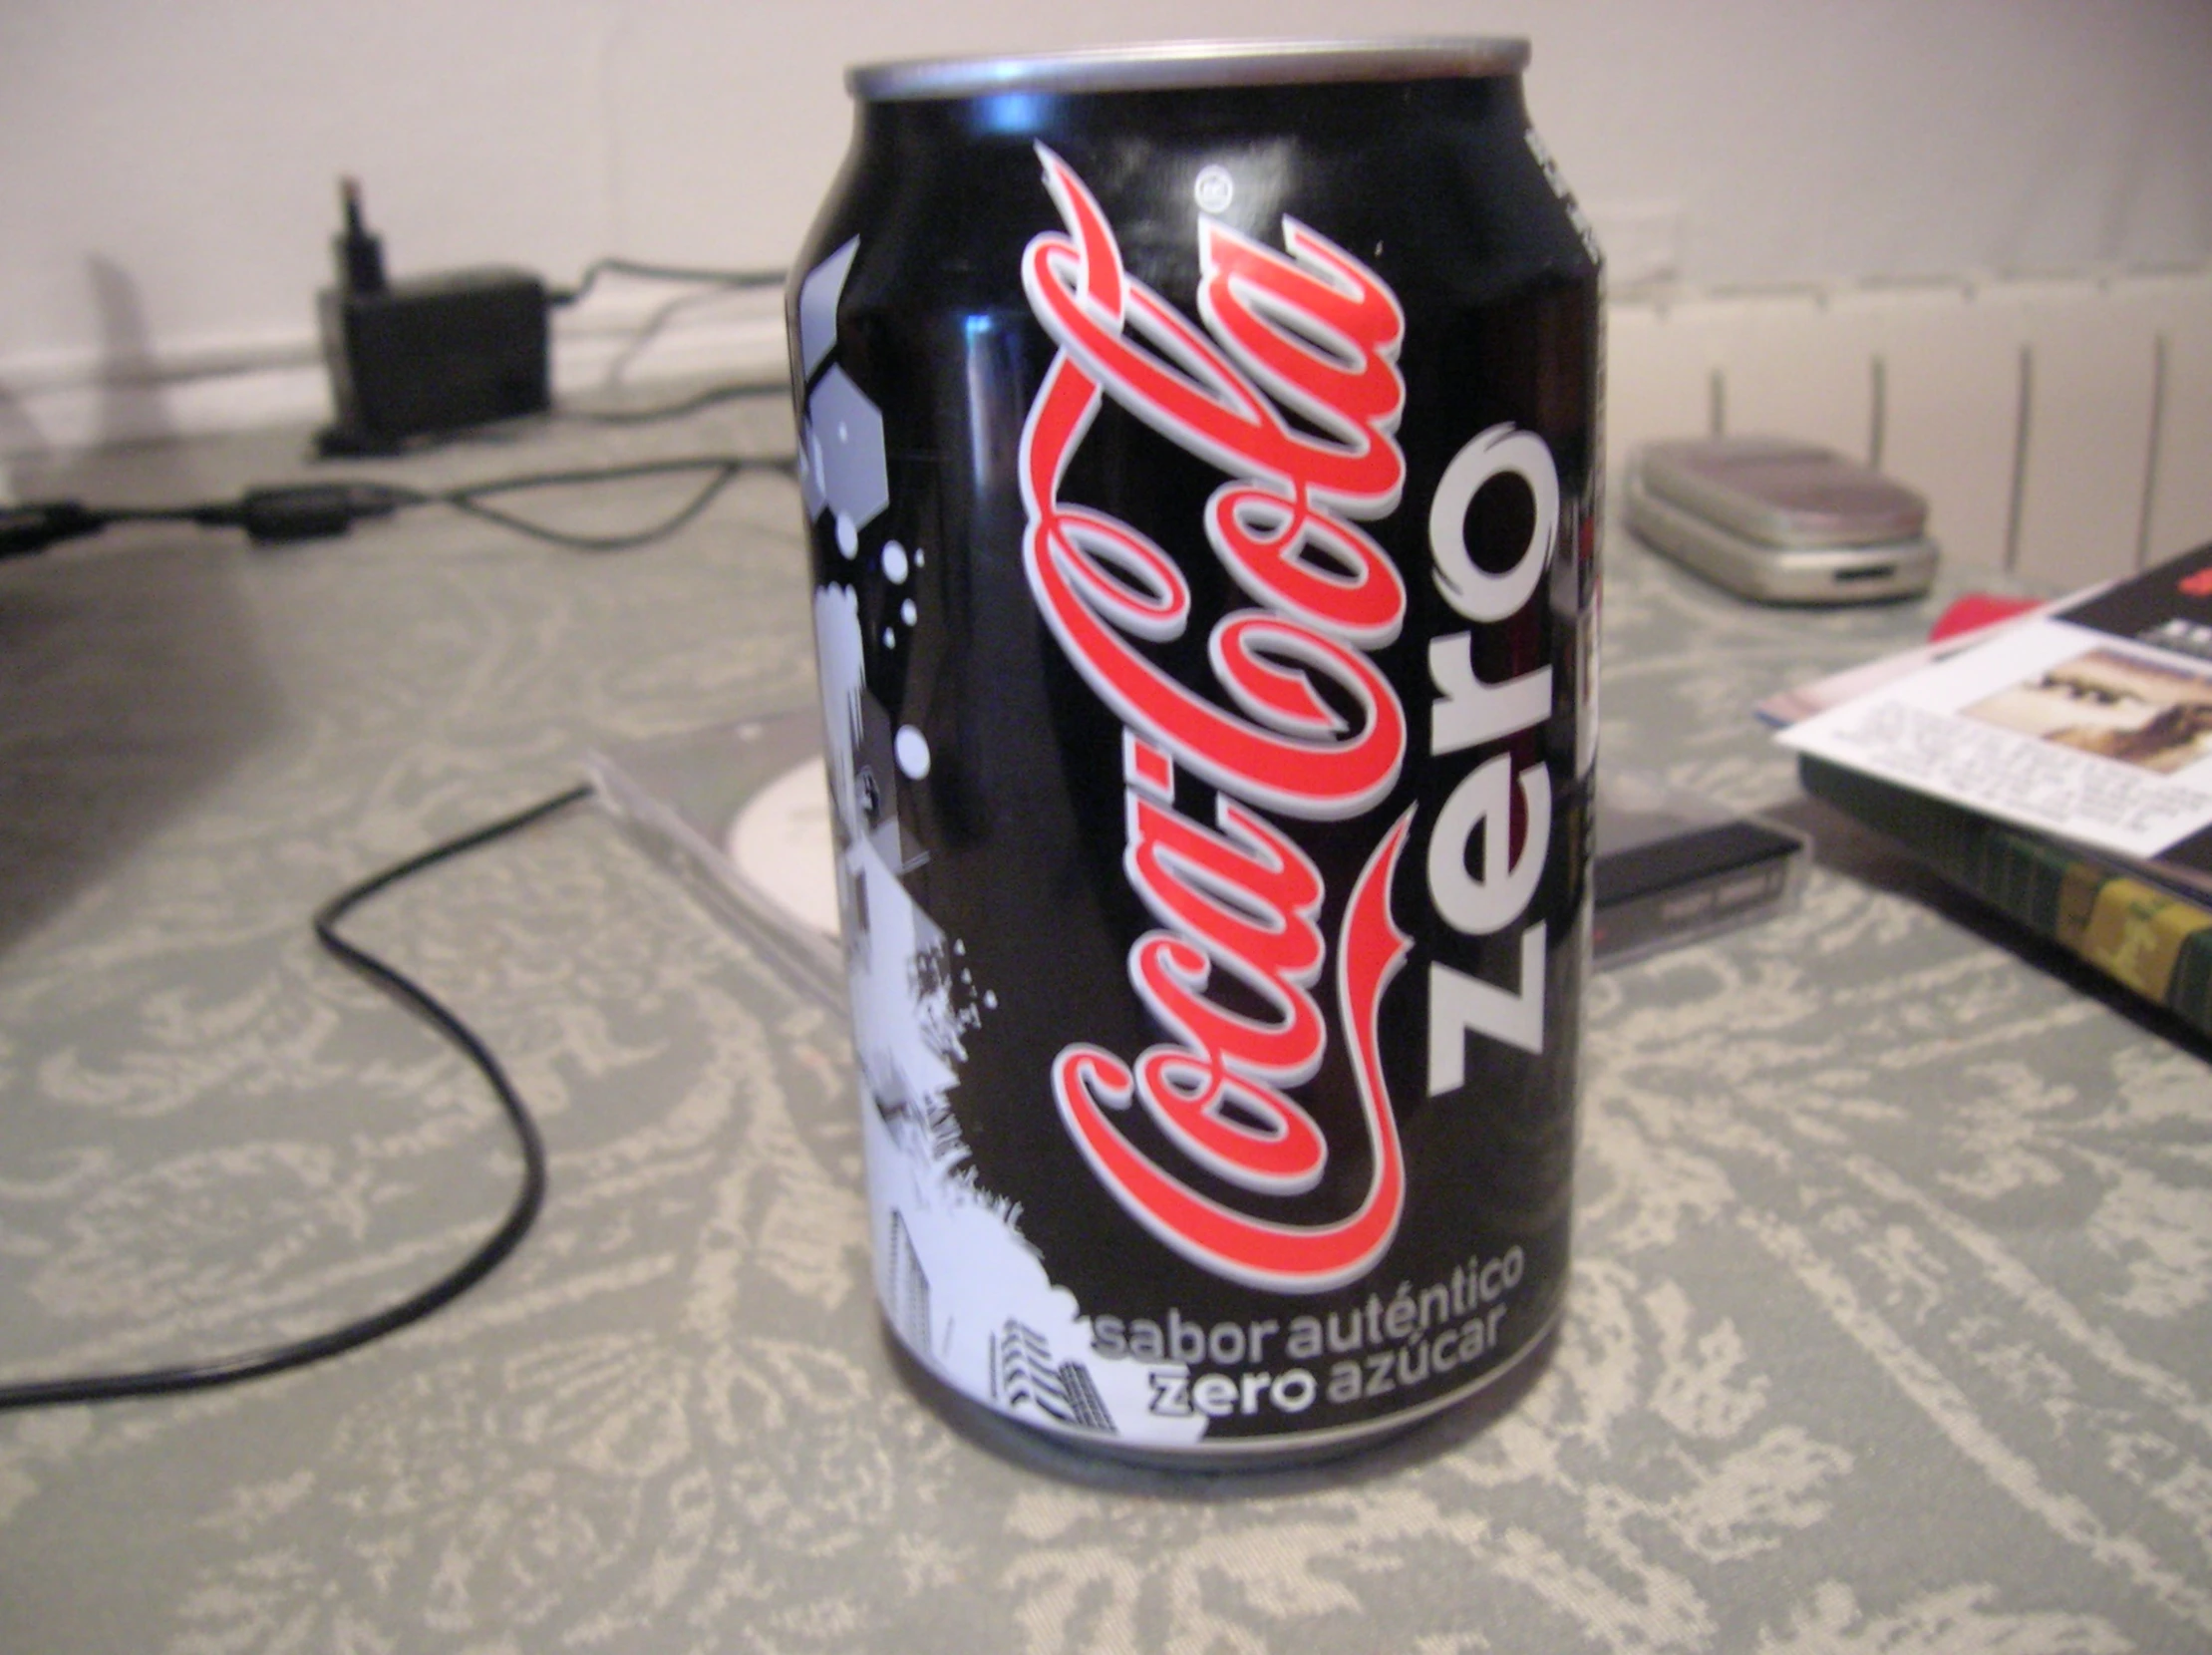 a can of coca cola sits on the table